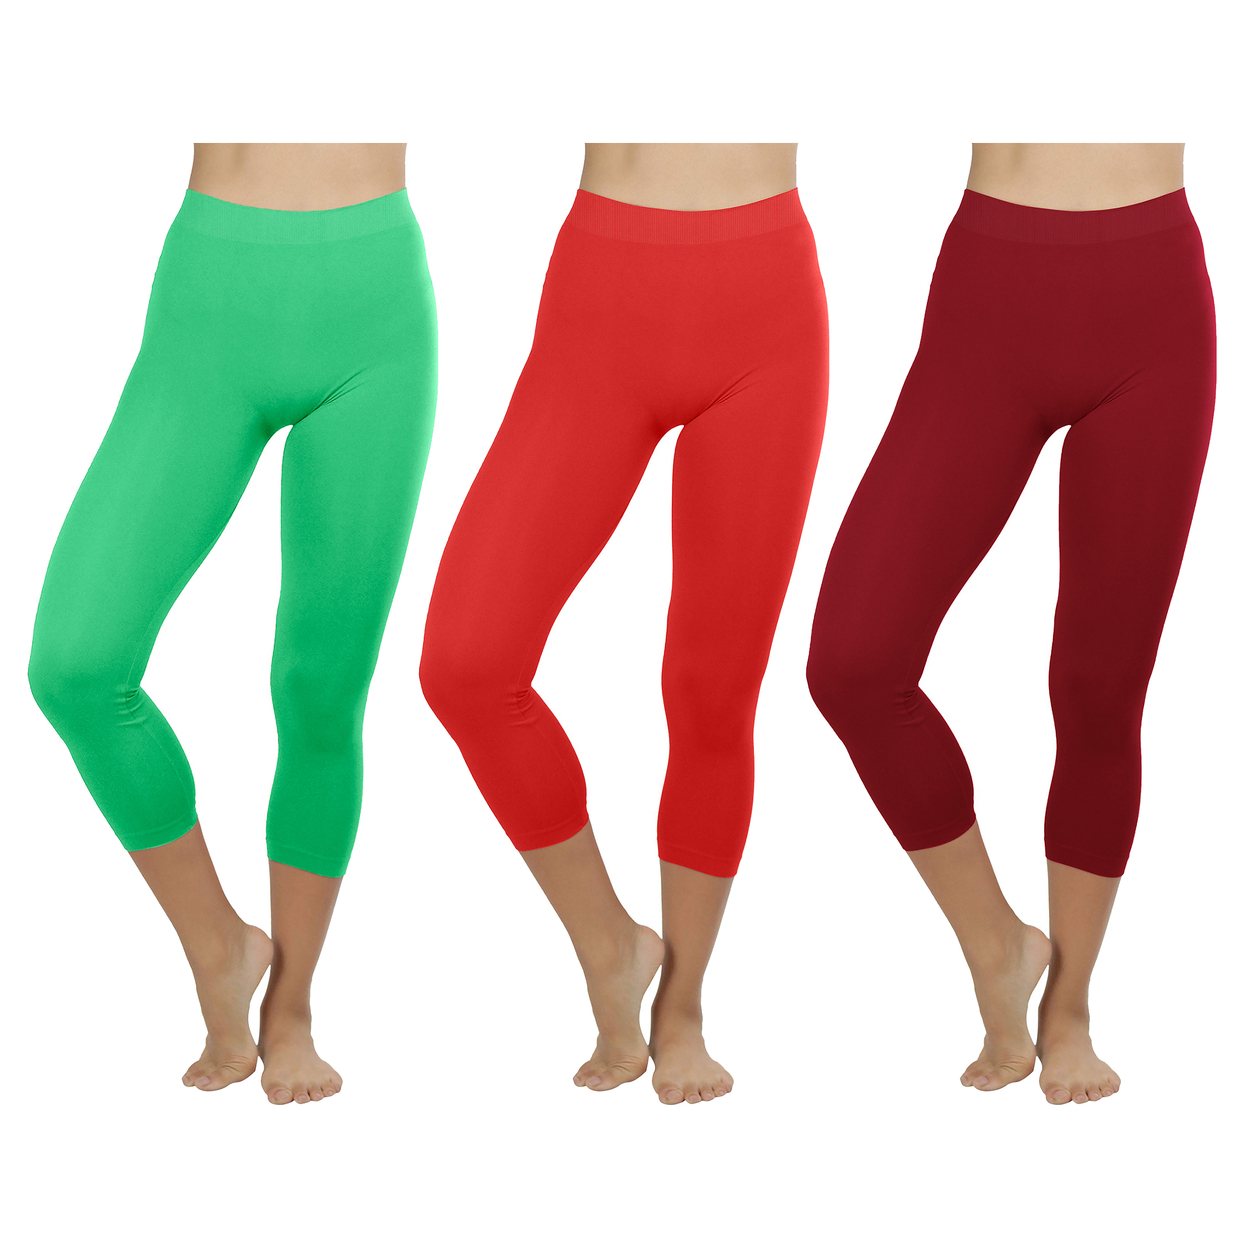 3-Pack: Women's Ultra-Soft High Waisted Smooth Stretch Active Yoga Capri Leggings - Green,green,green, Large